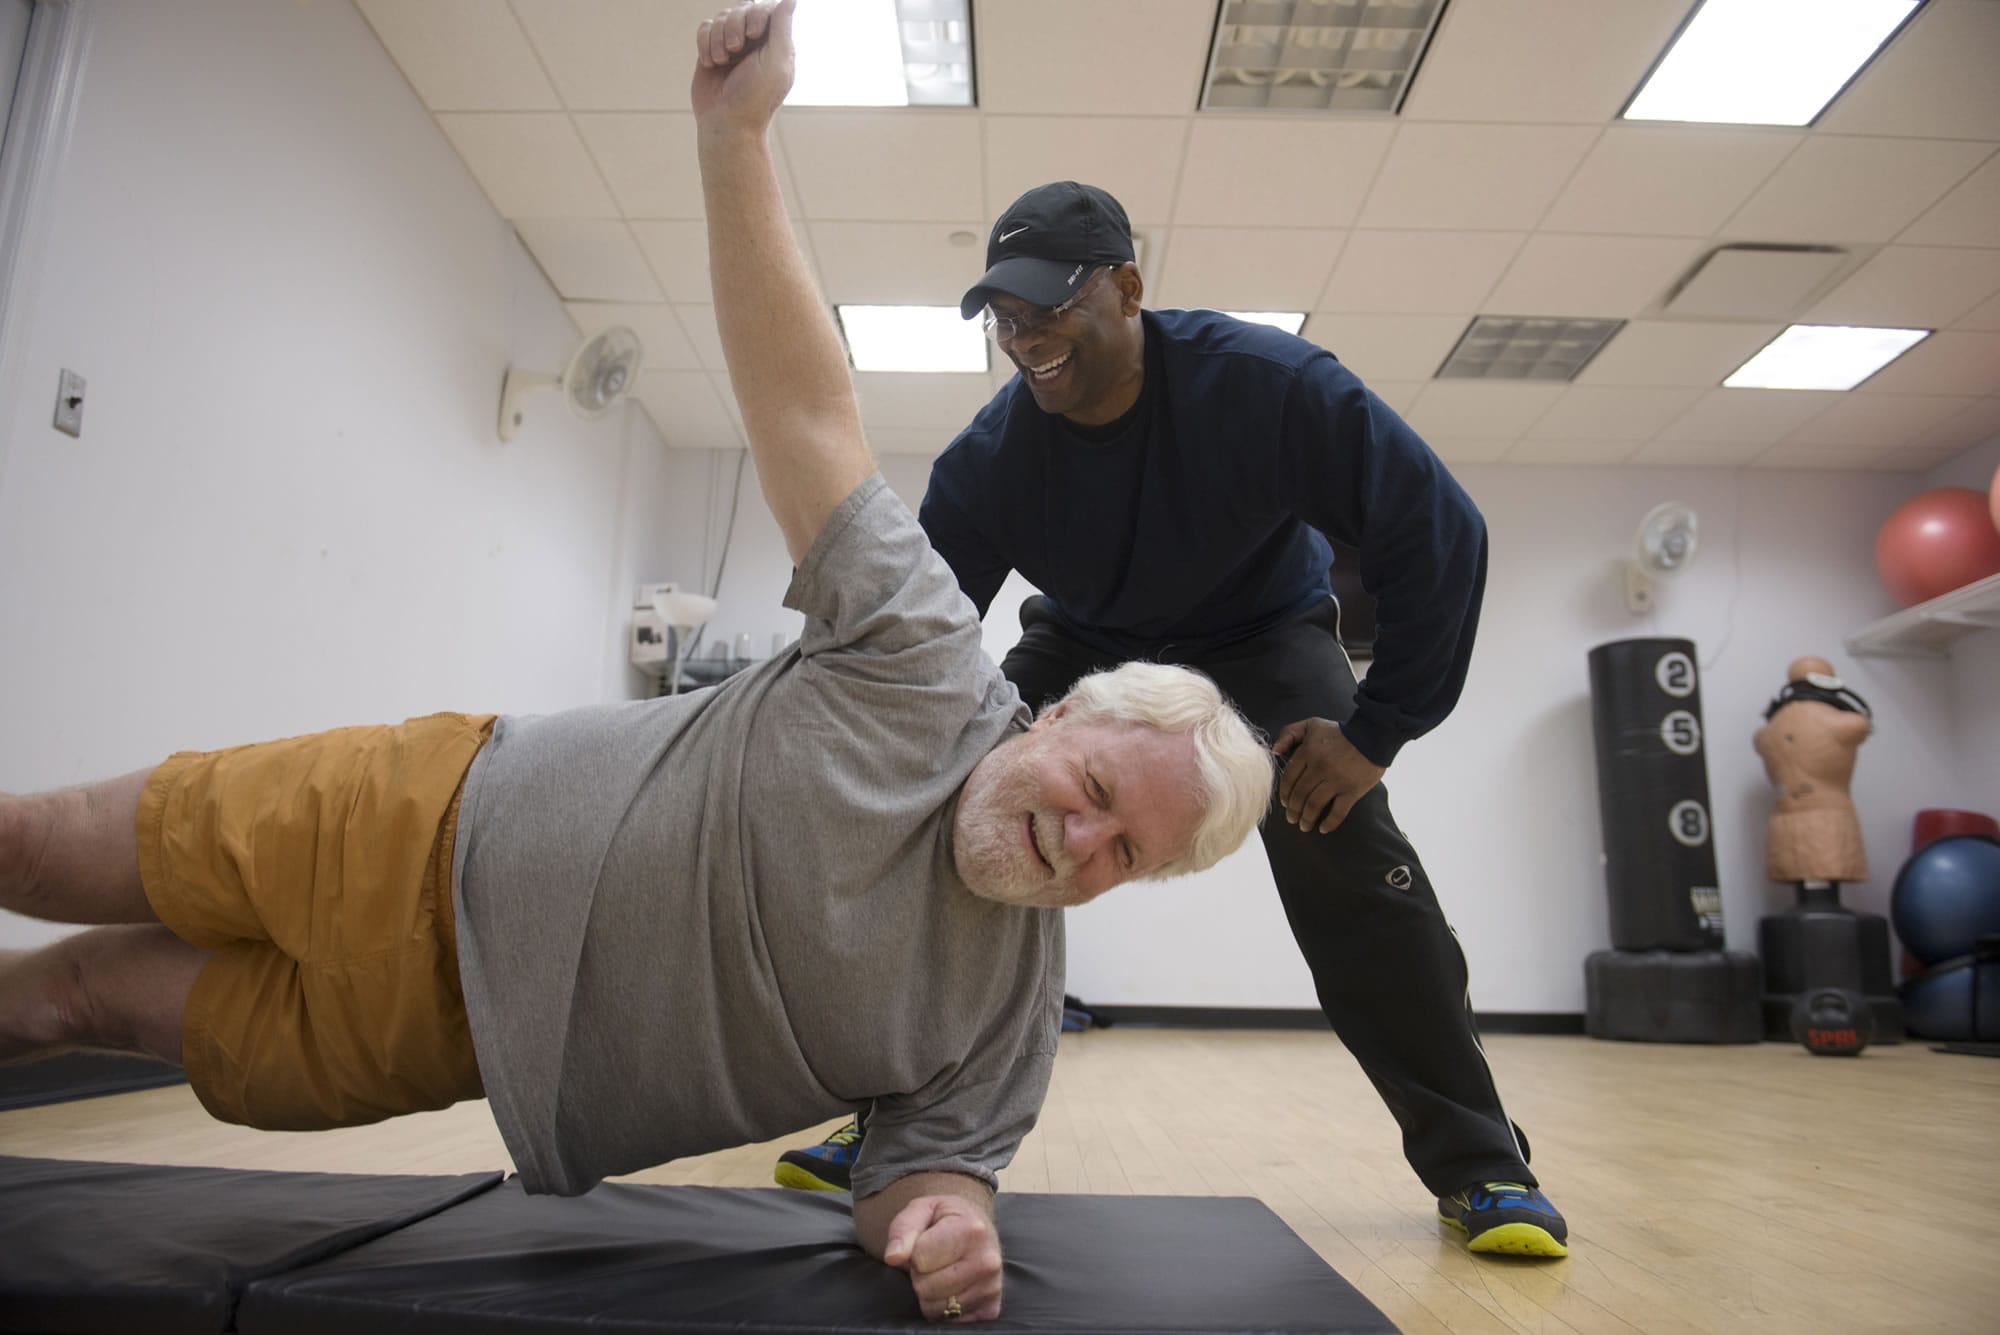 Bryant Johnson, standing, guides Greg Hughes, chief deputy of the D.C. District Court, through core training exercises on March 6 in Washington.